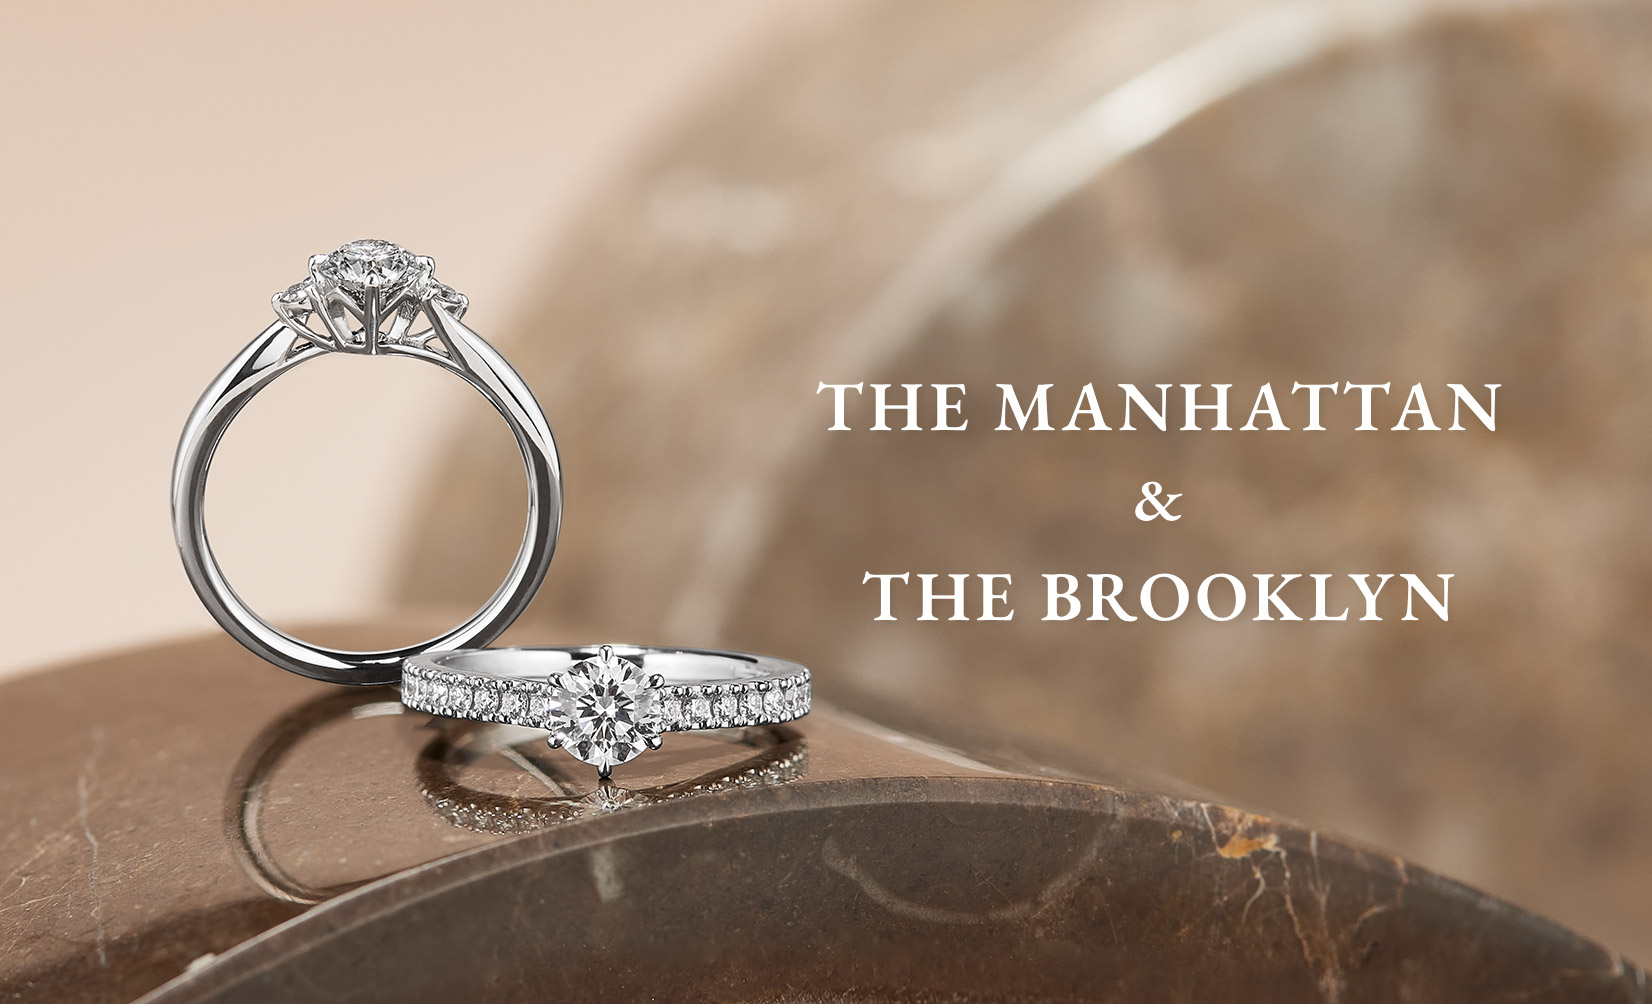 New Collection2021 THE MANHATTAN & THE BROOKLYN